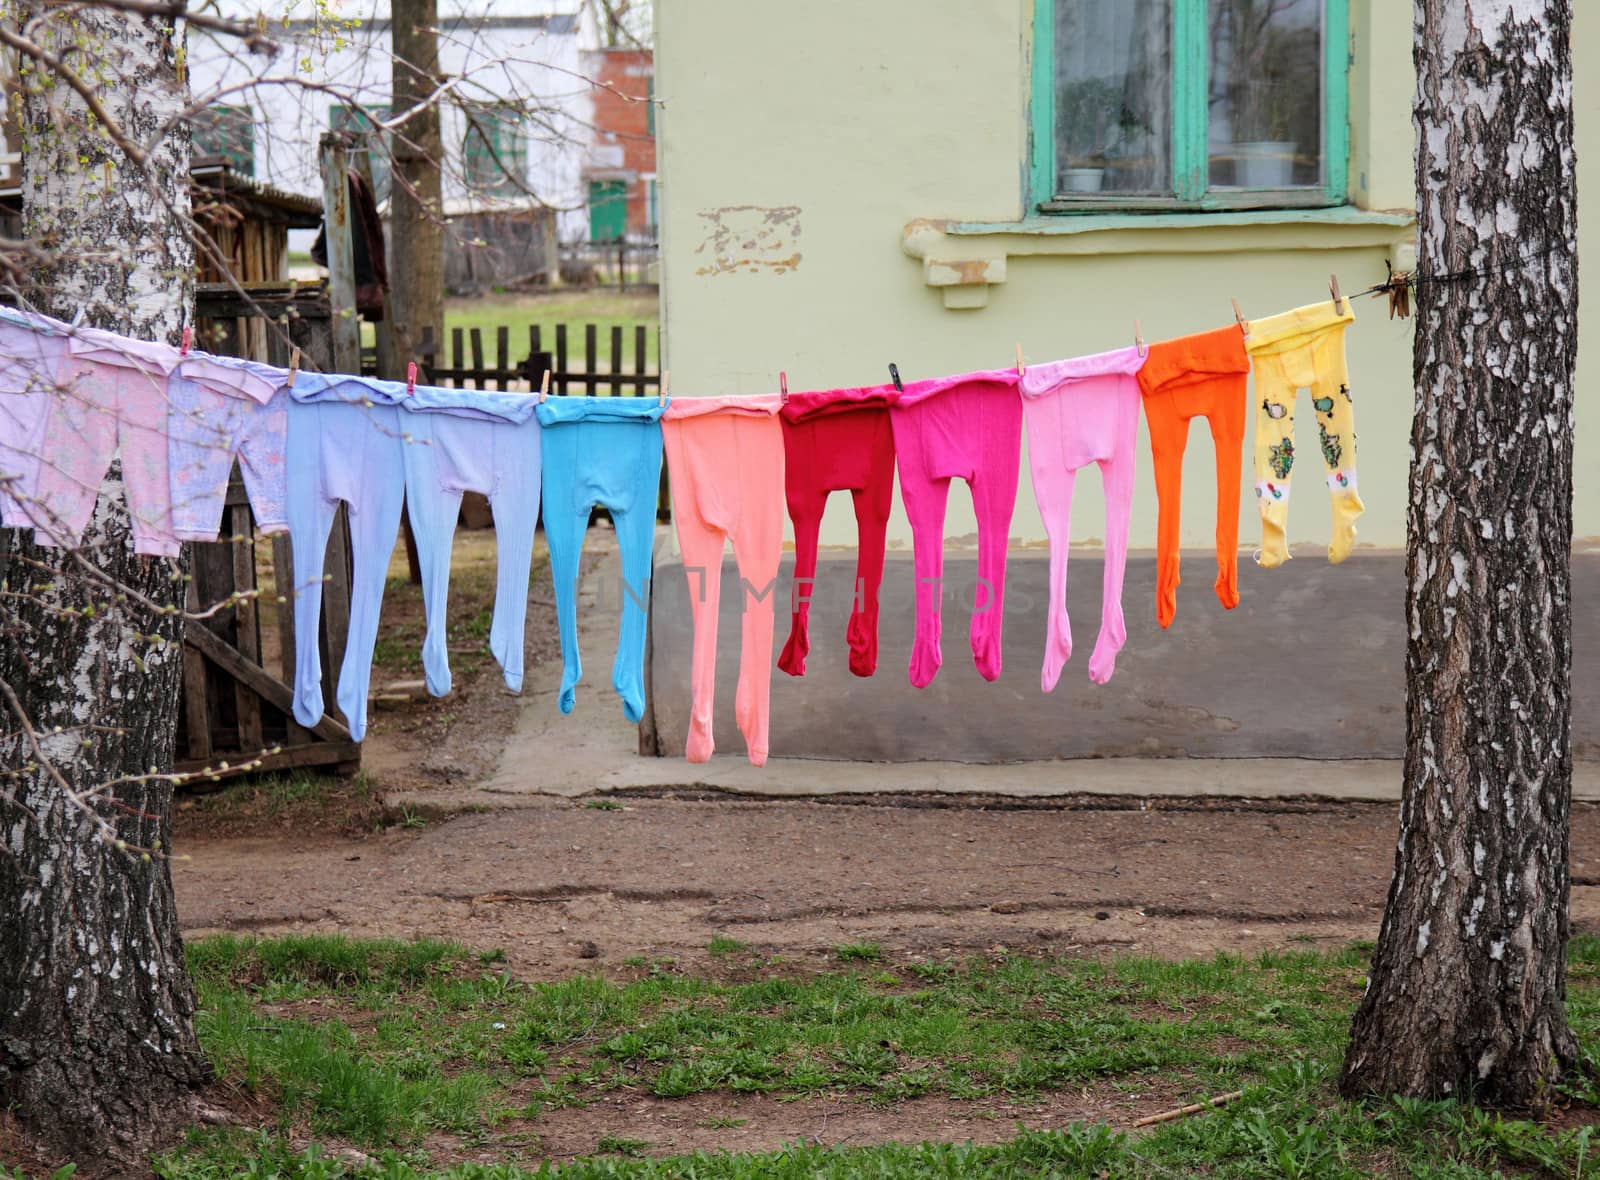 laundered children's colored tights drying on the street